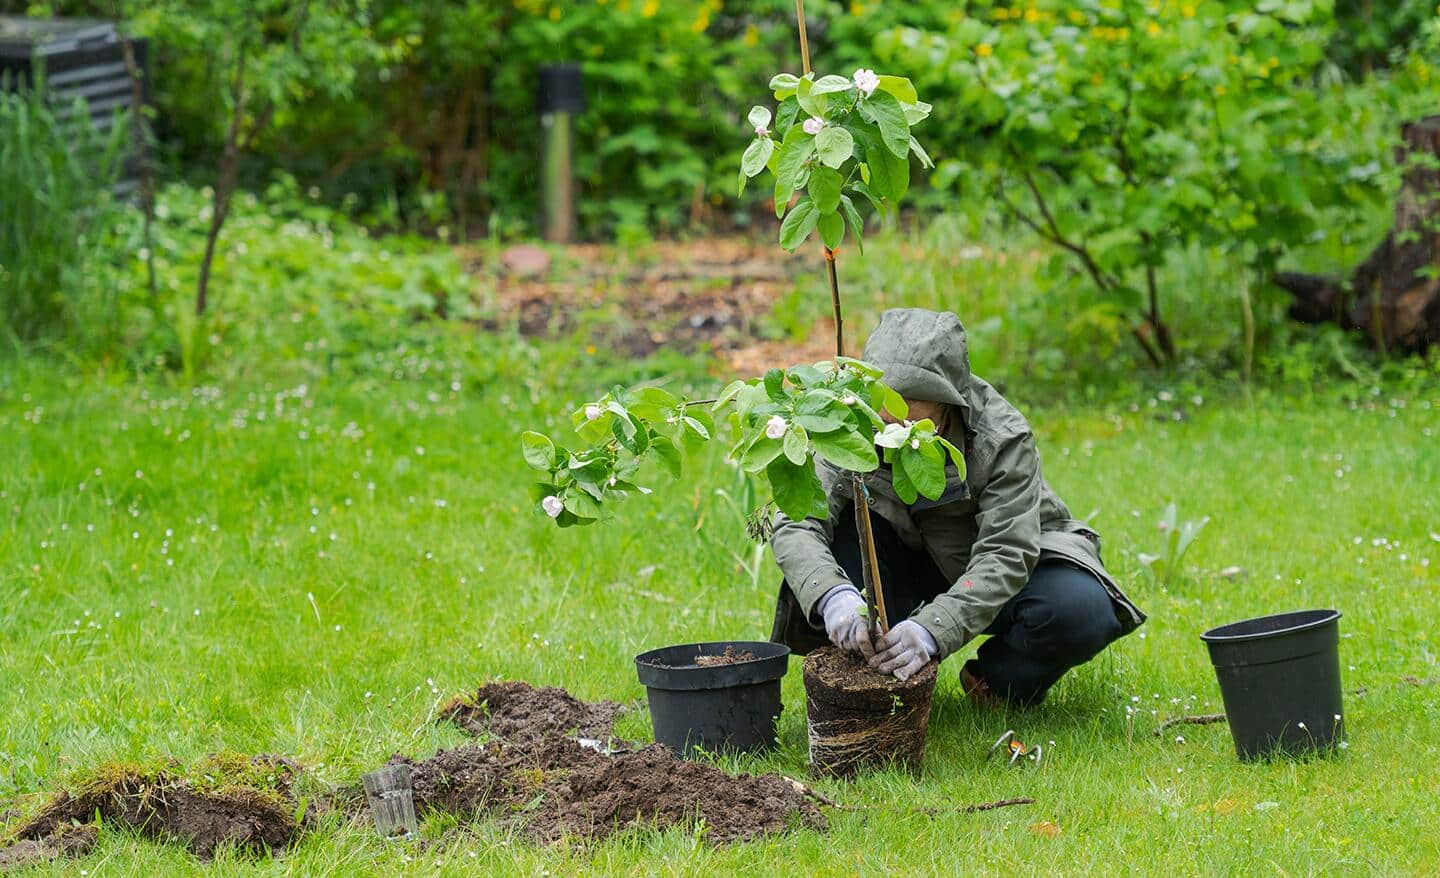 How to grow & care for pear trees in 5 simple steps